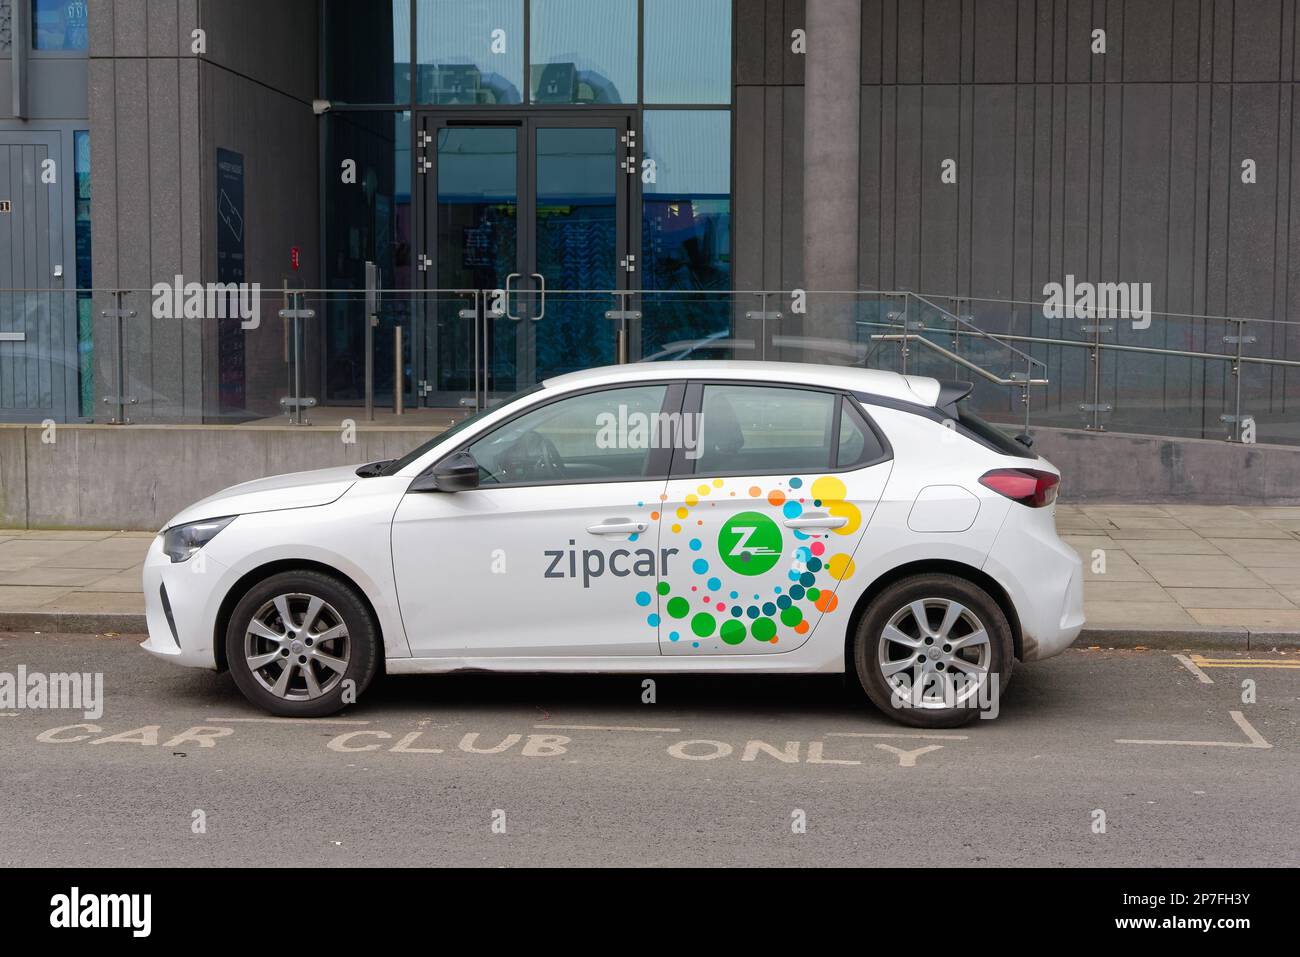 A white Zipcar saloon car parked in a marked 'Car Club Bay' outside a modern  building  in central London, England UK Stock Photo